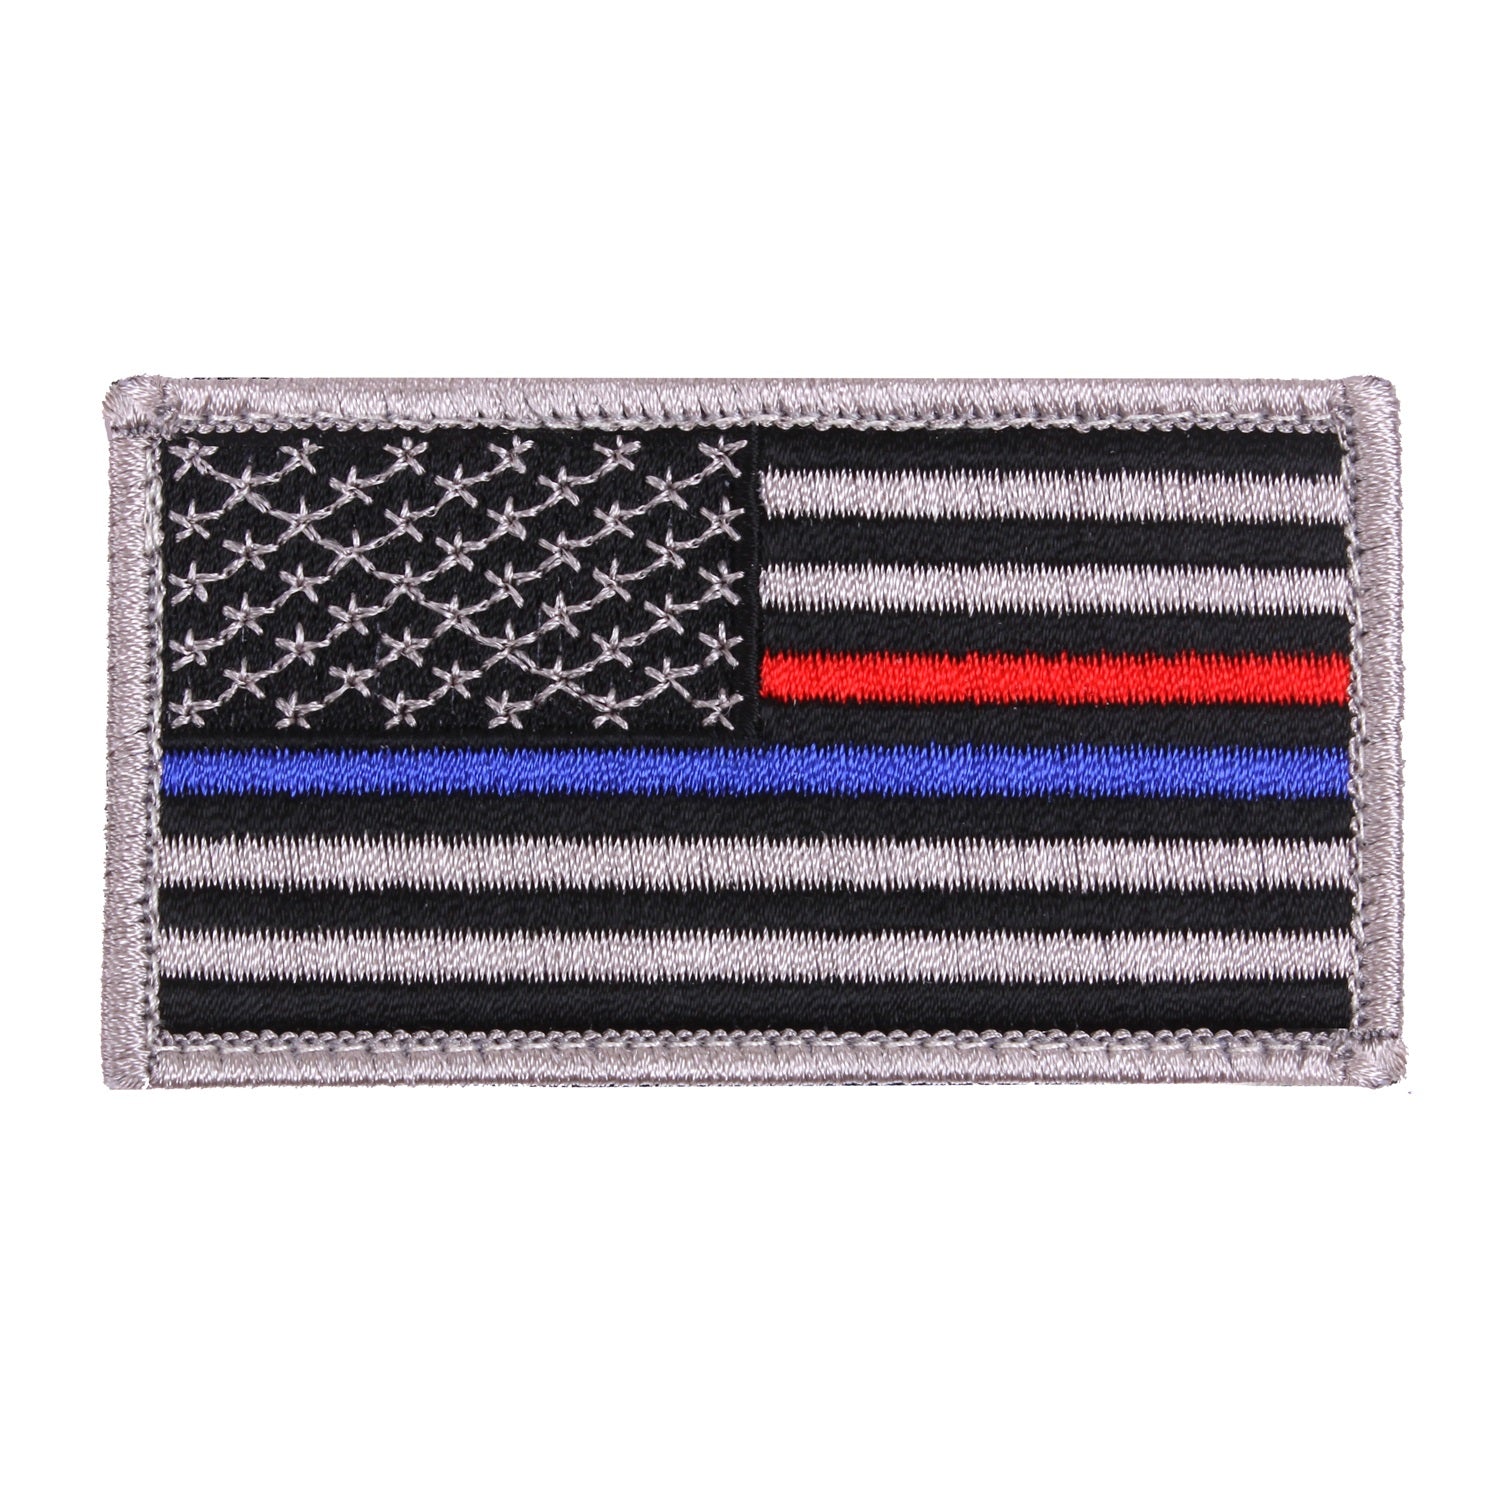 Rothco Thin Blue Line / Thin Red Line US Flag Patch - Hook Back